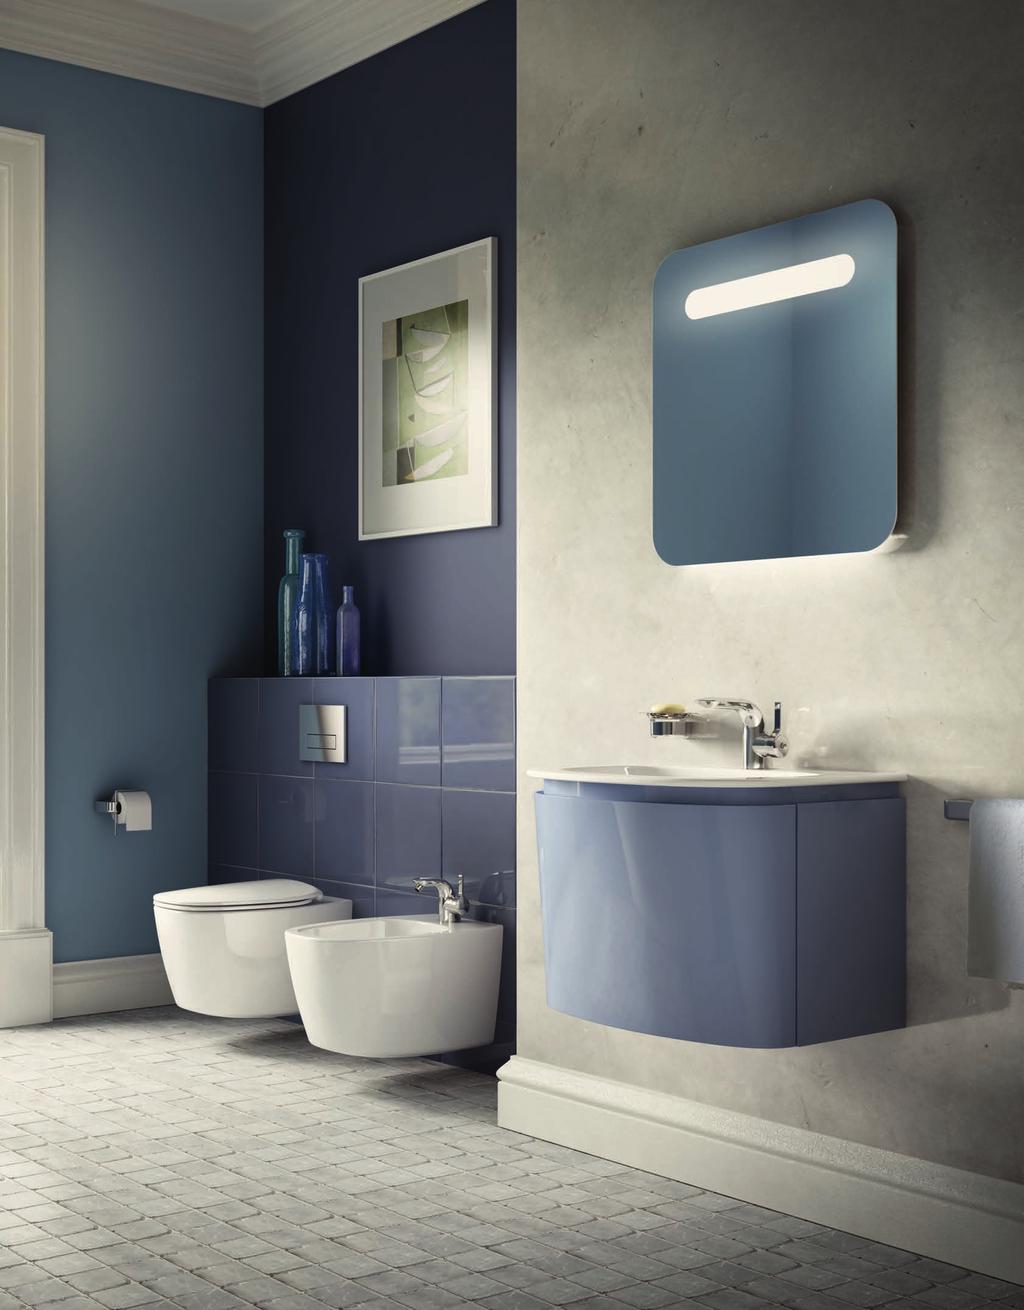 Dea vanity with vanity furniture in Glossy Blue finish.